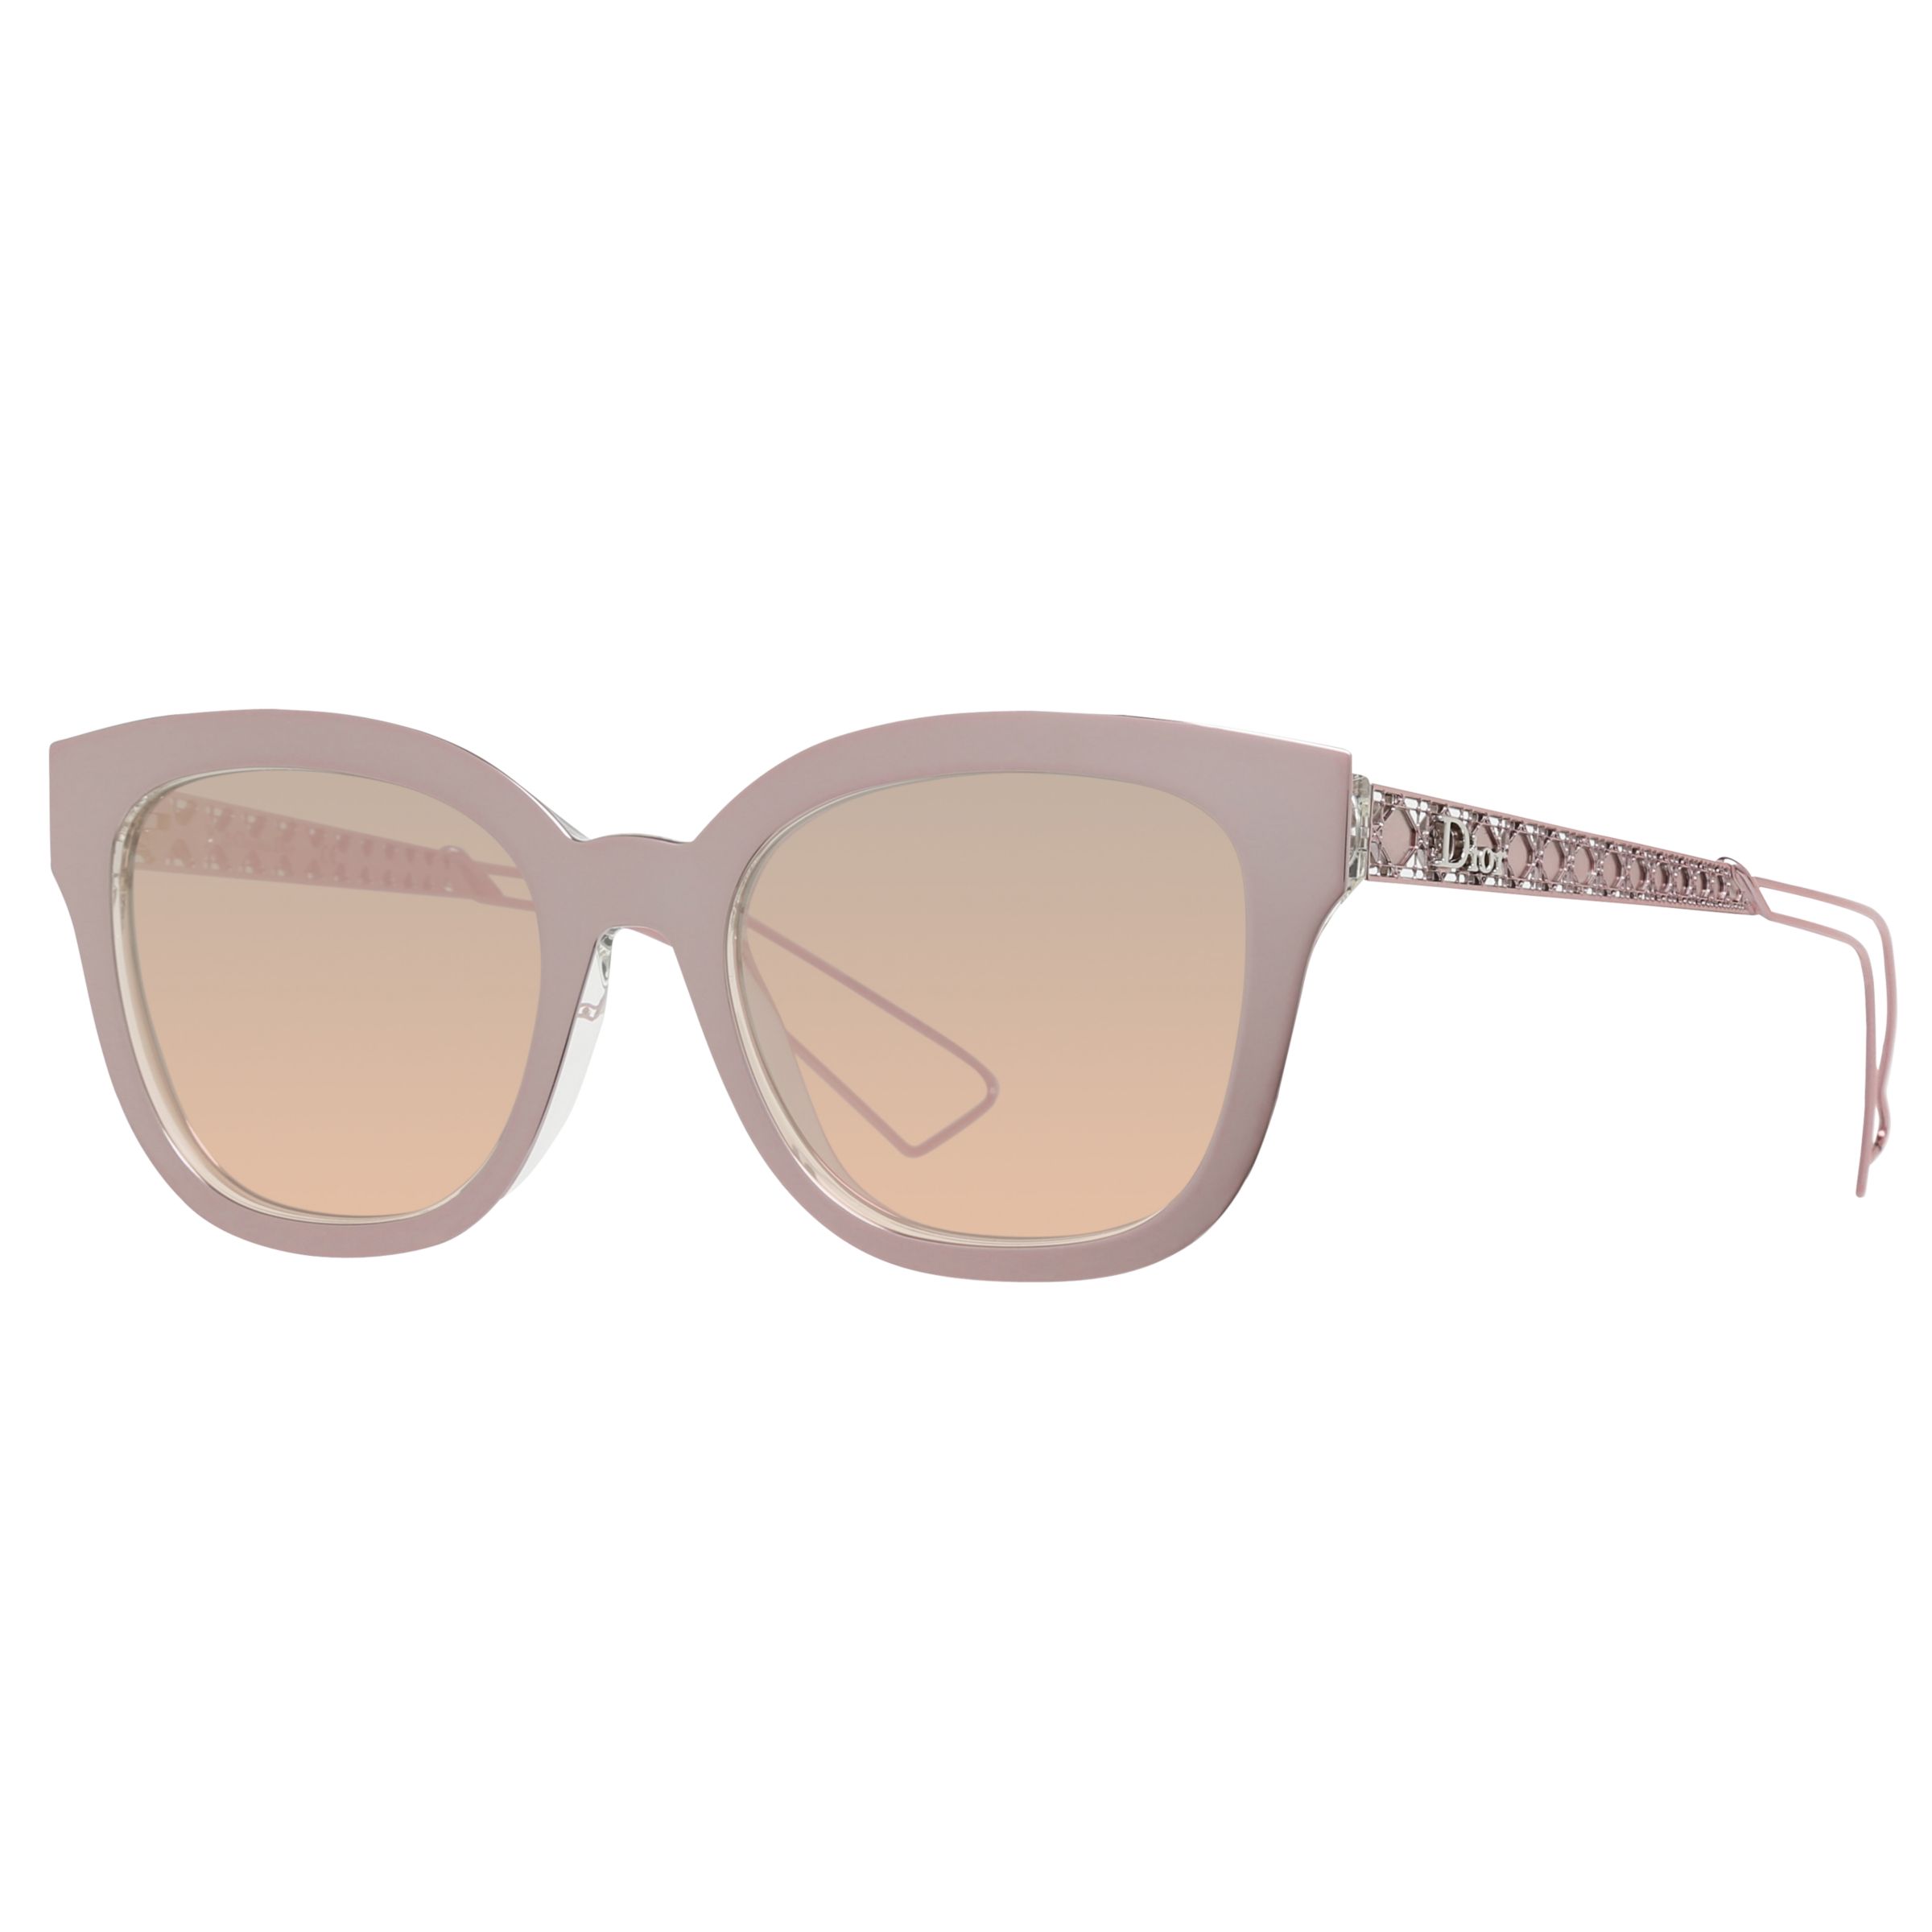 DIOR DIORama1 Embellished Cat's Eye Sunglasses, Nude/Pink Gradient